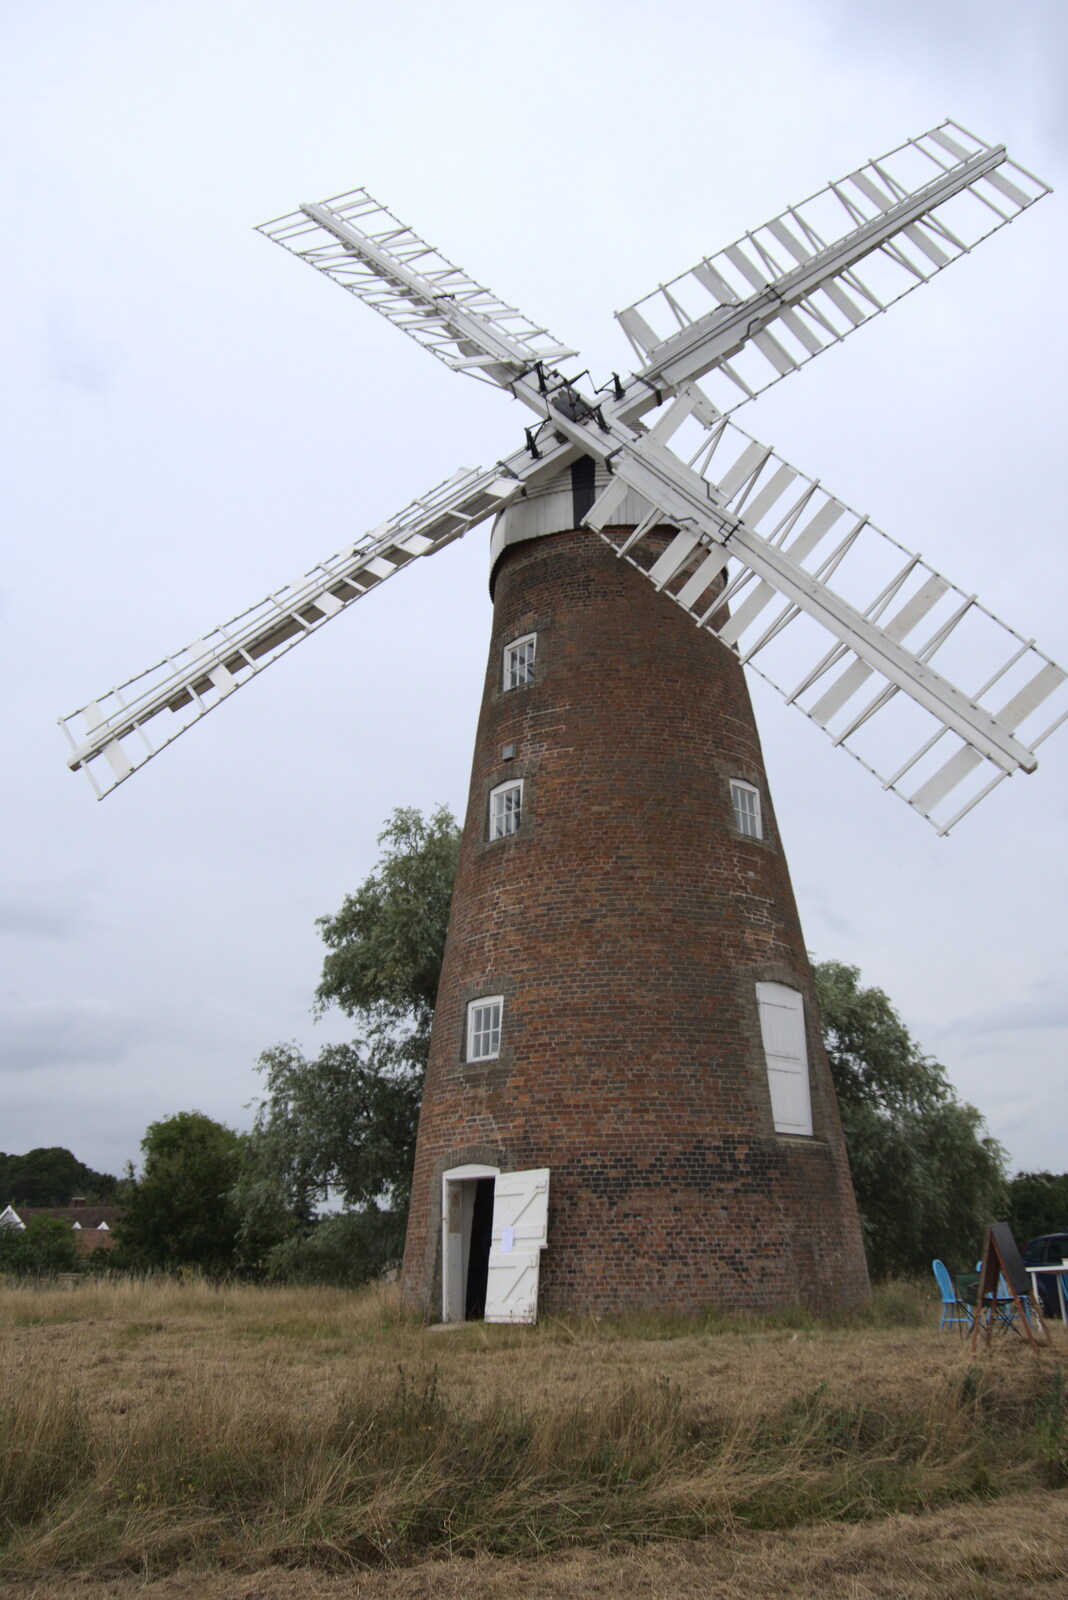 Billingford Windmill with its new sails from An Open Day at the Windmill, Billingford, Norfolk - 21st August 2021